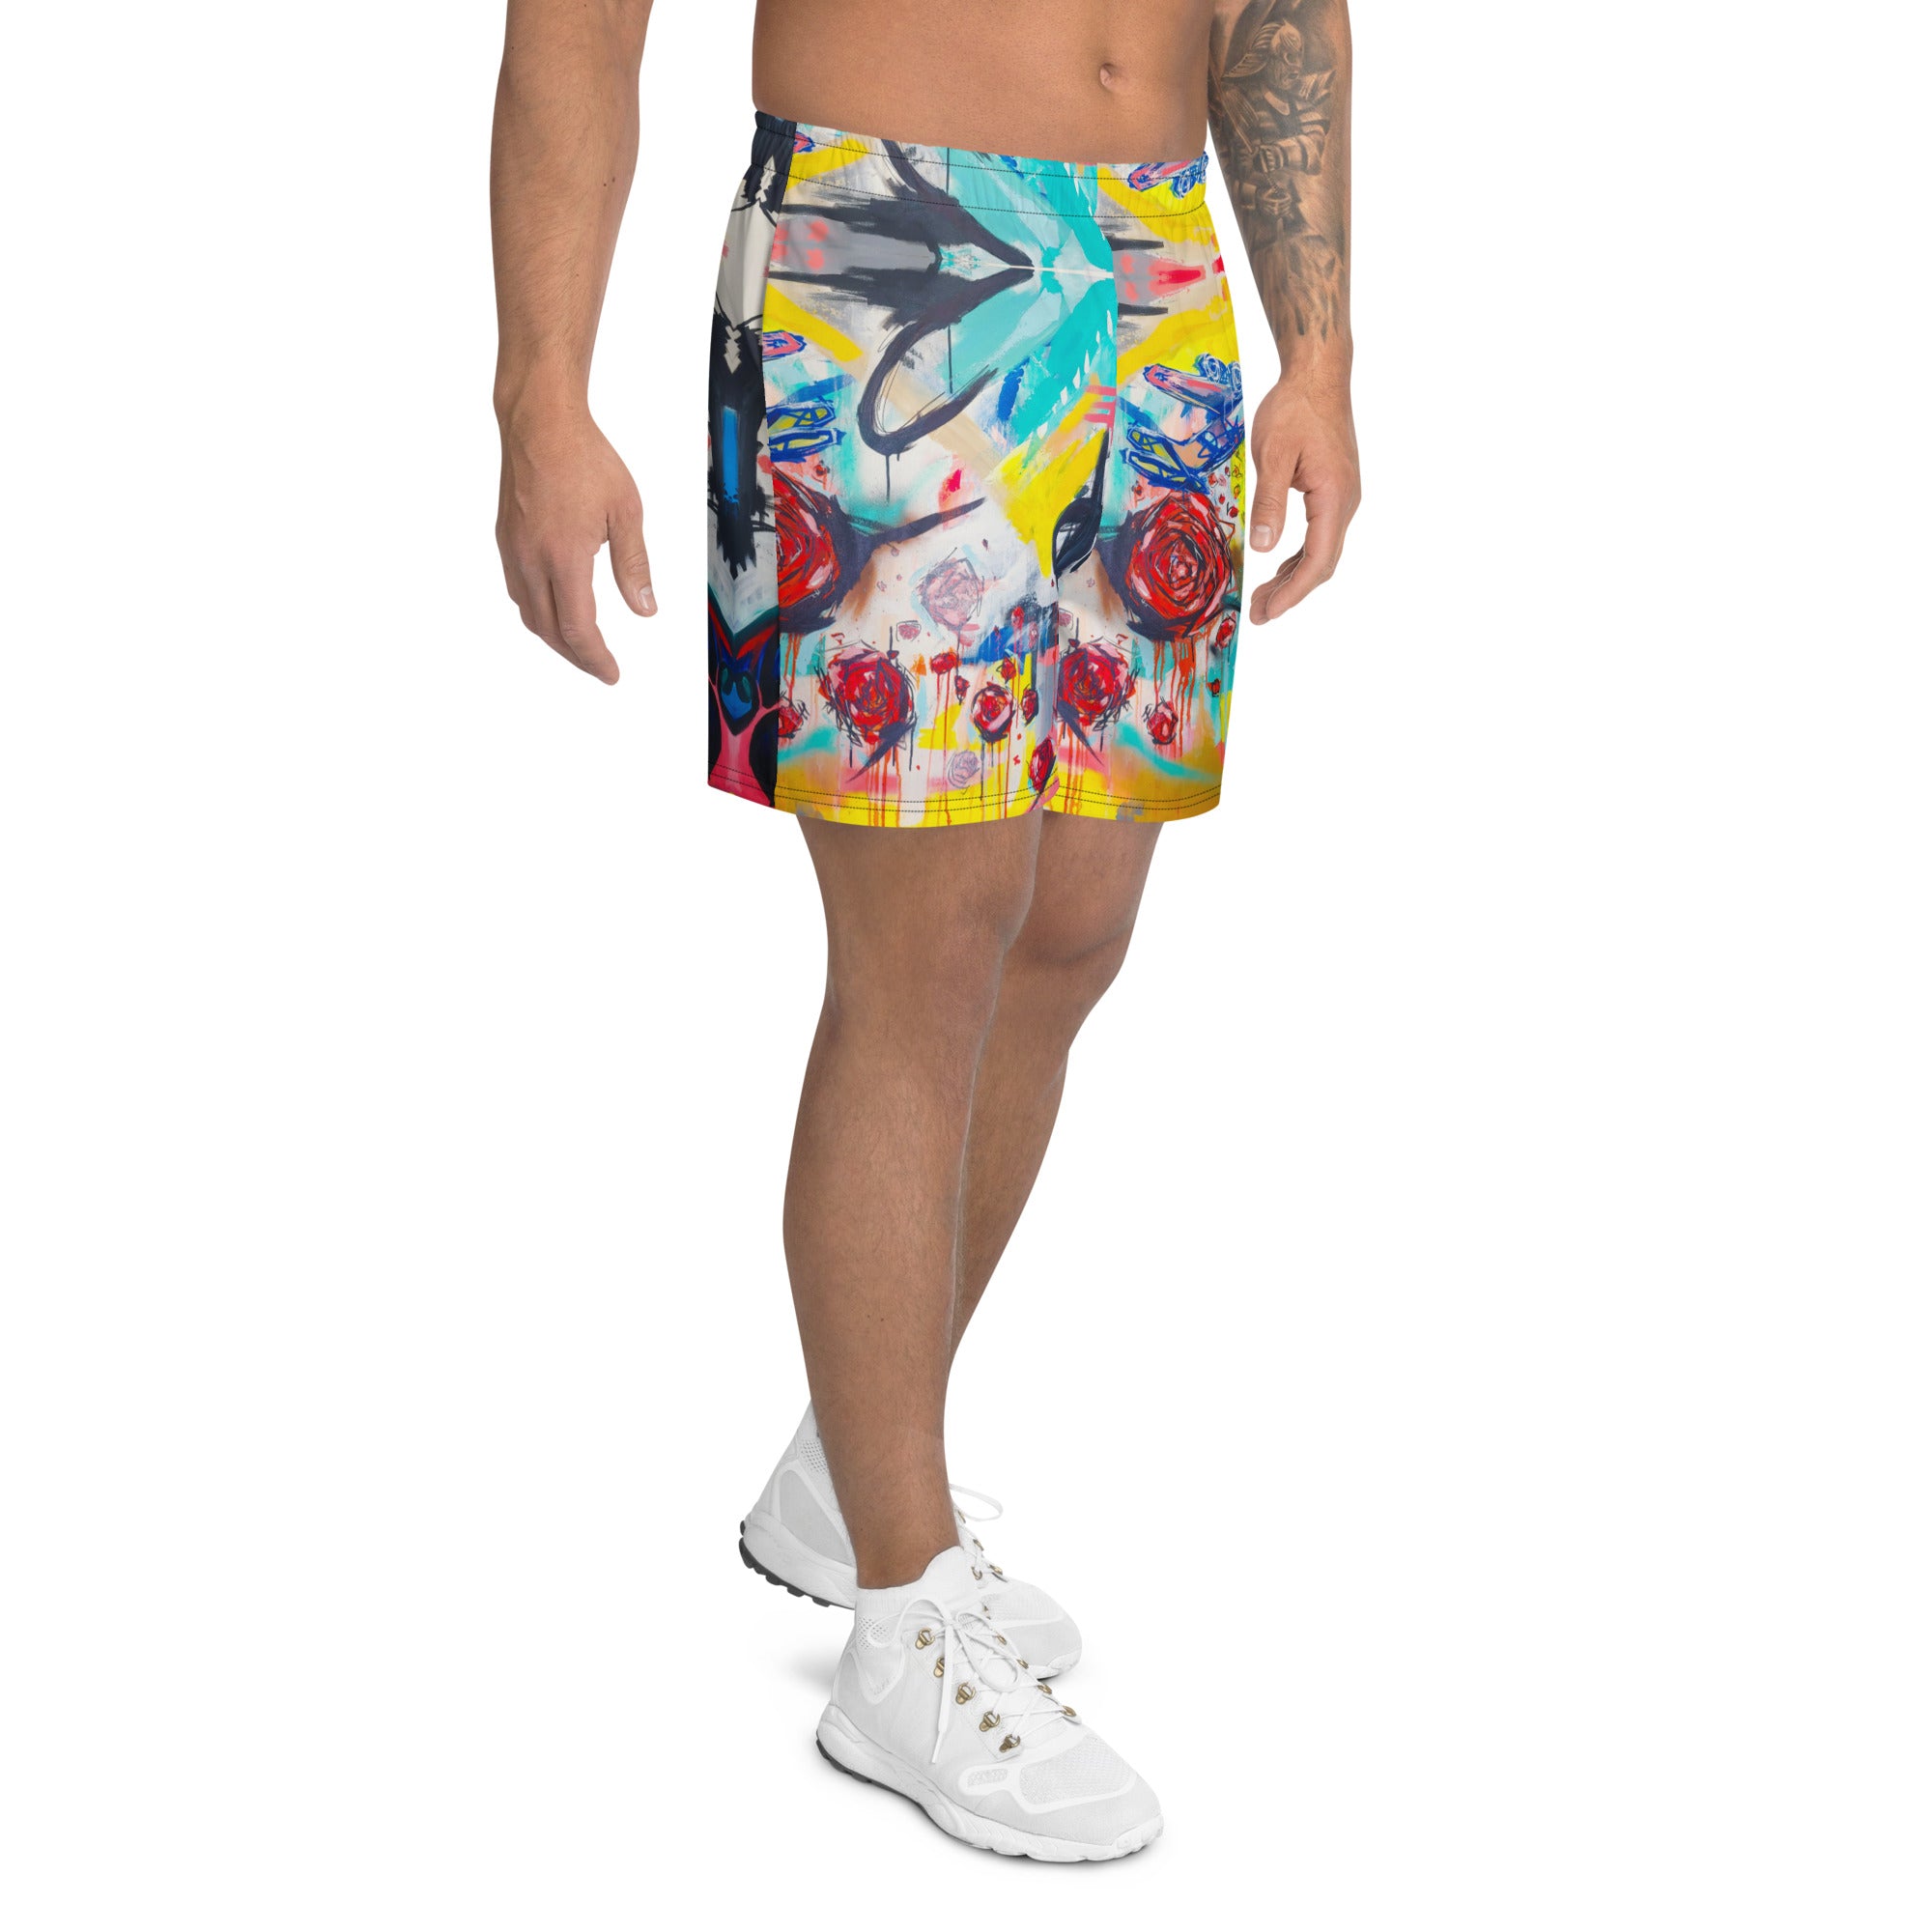 Drop Bouquets Not Bombs Shorts